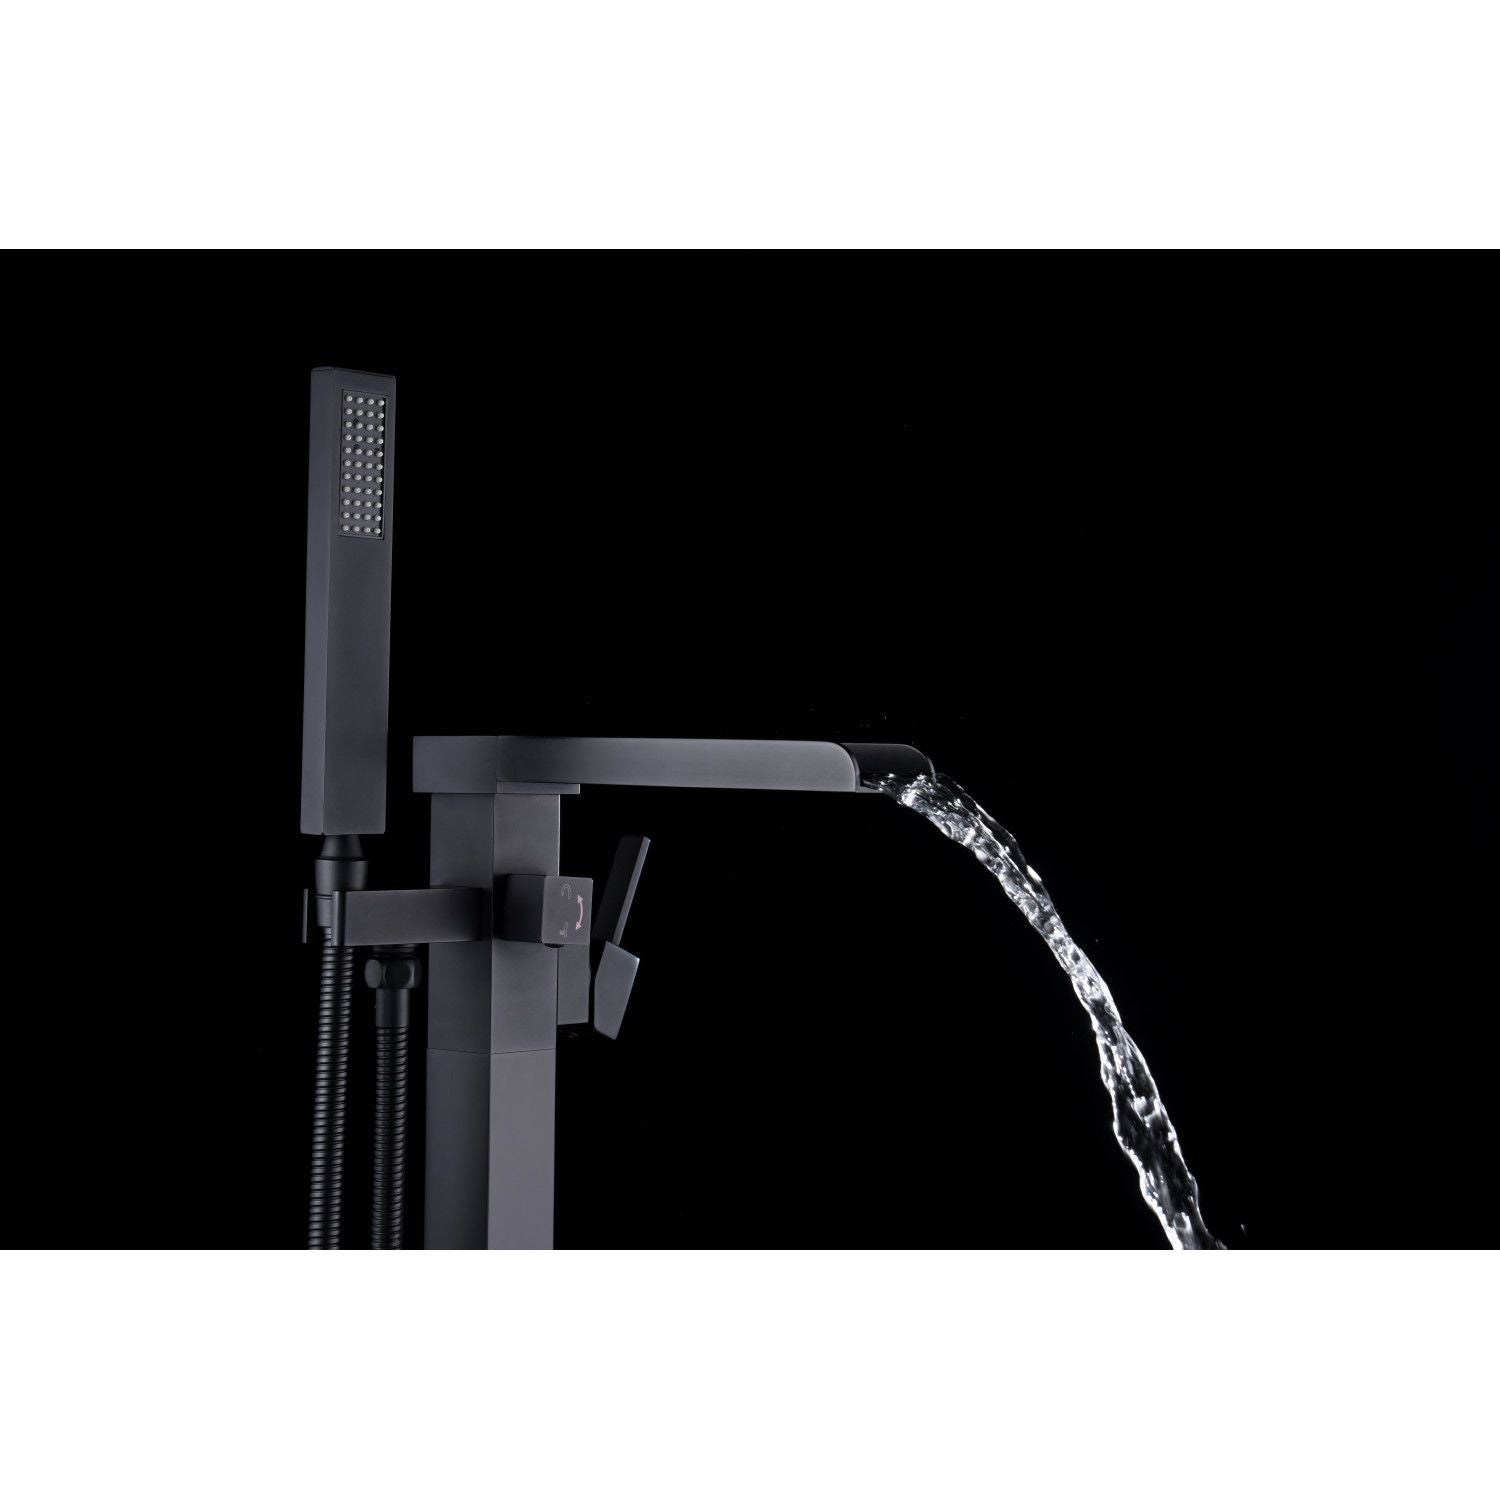 Union 2-Handle Claw Foot Tub Faucet with Hand Shower in Matte Black